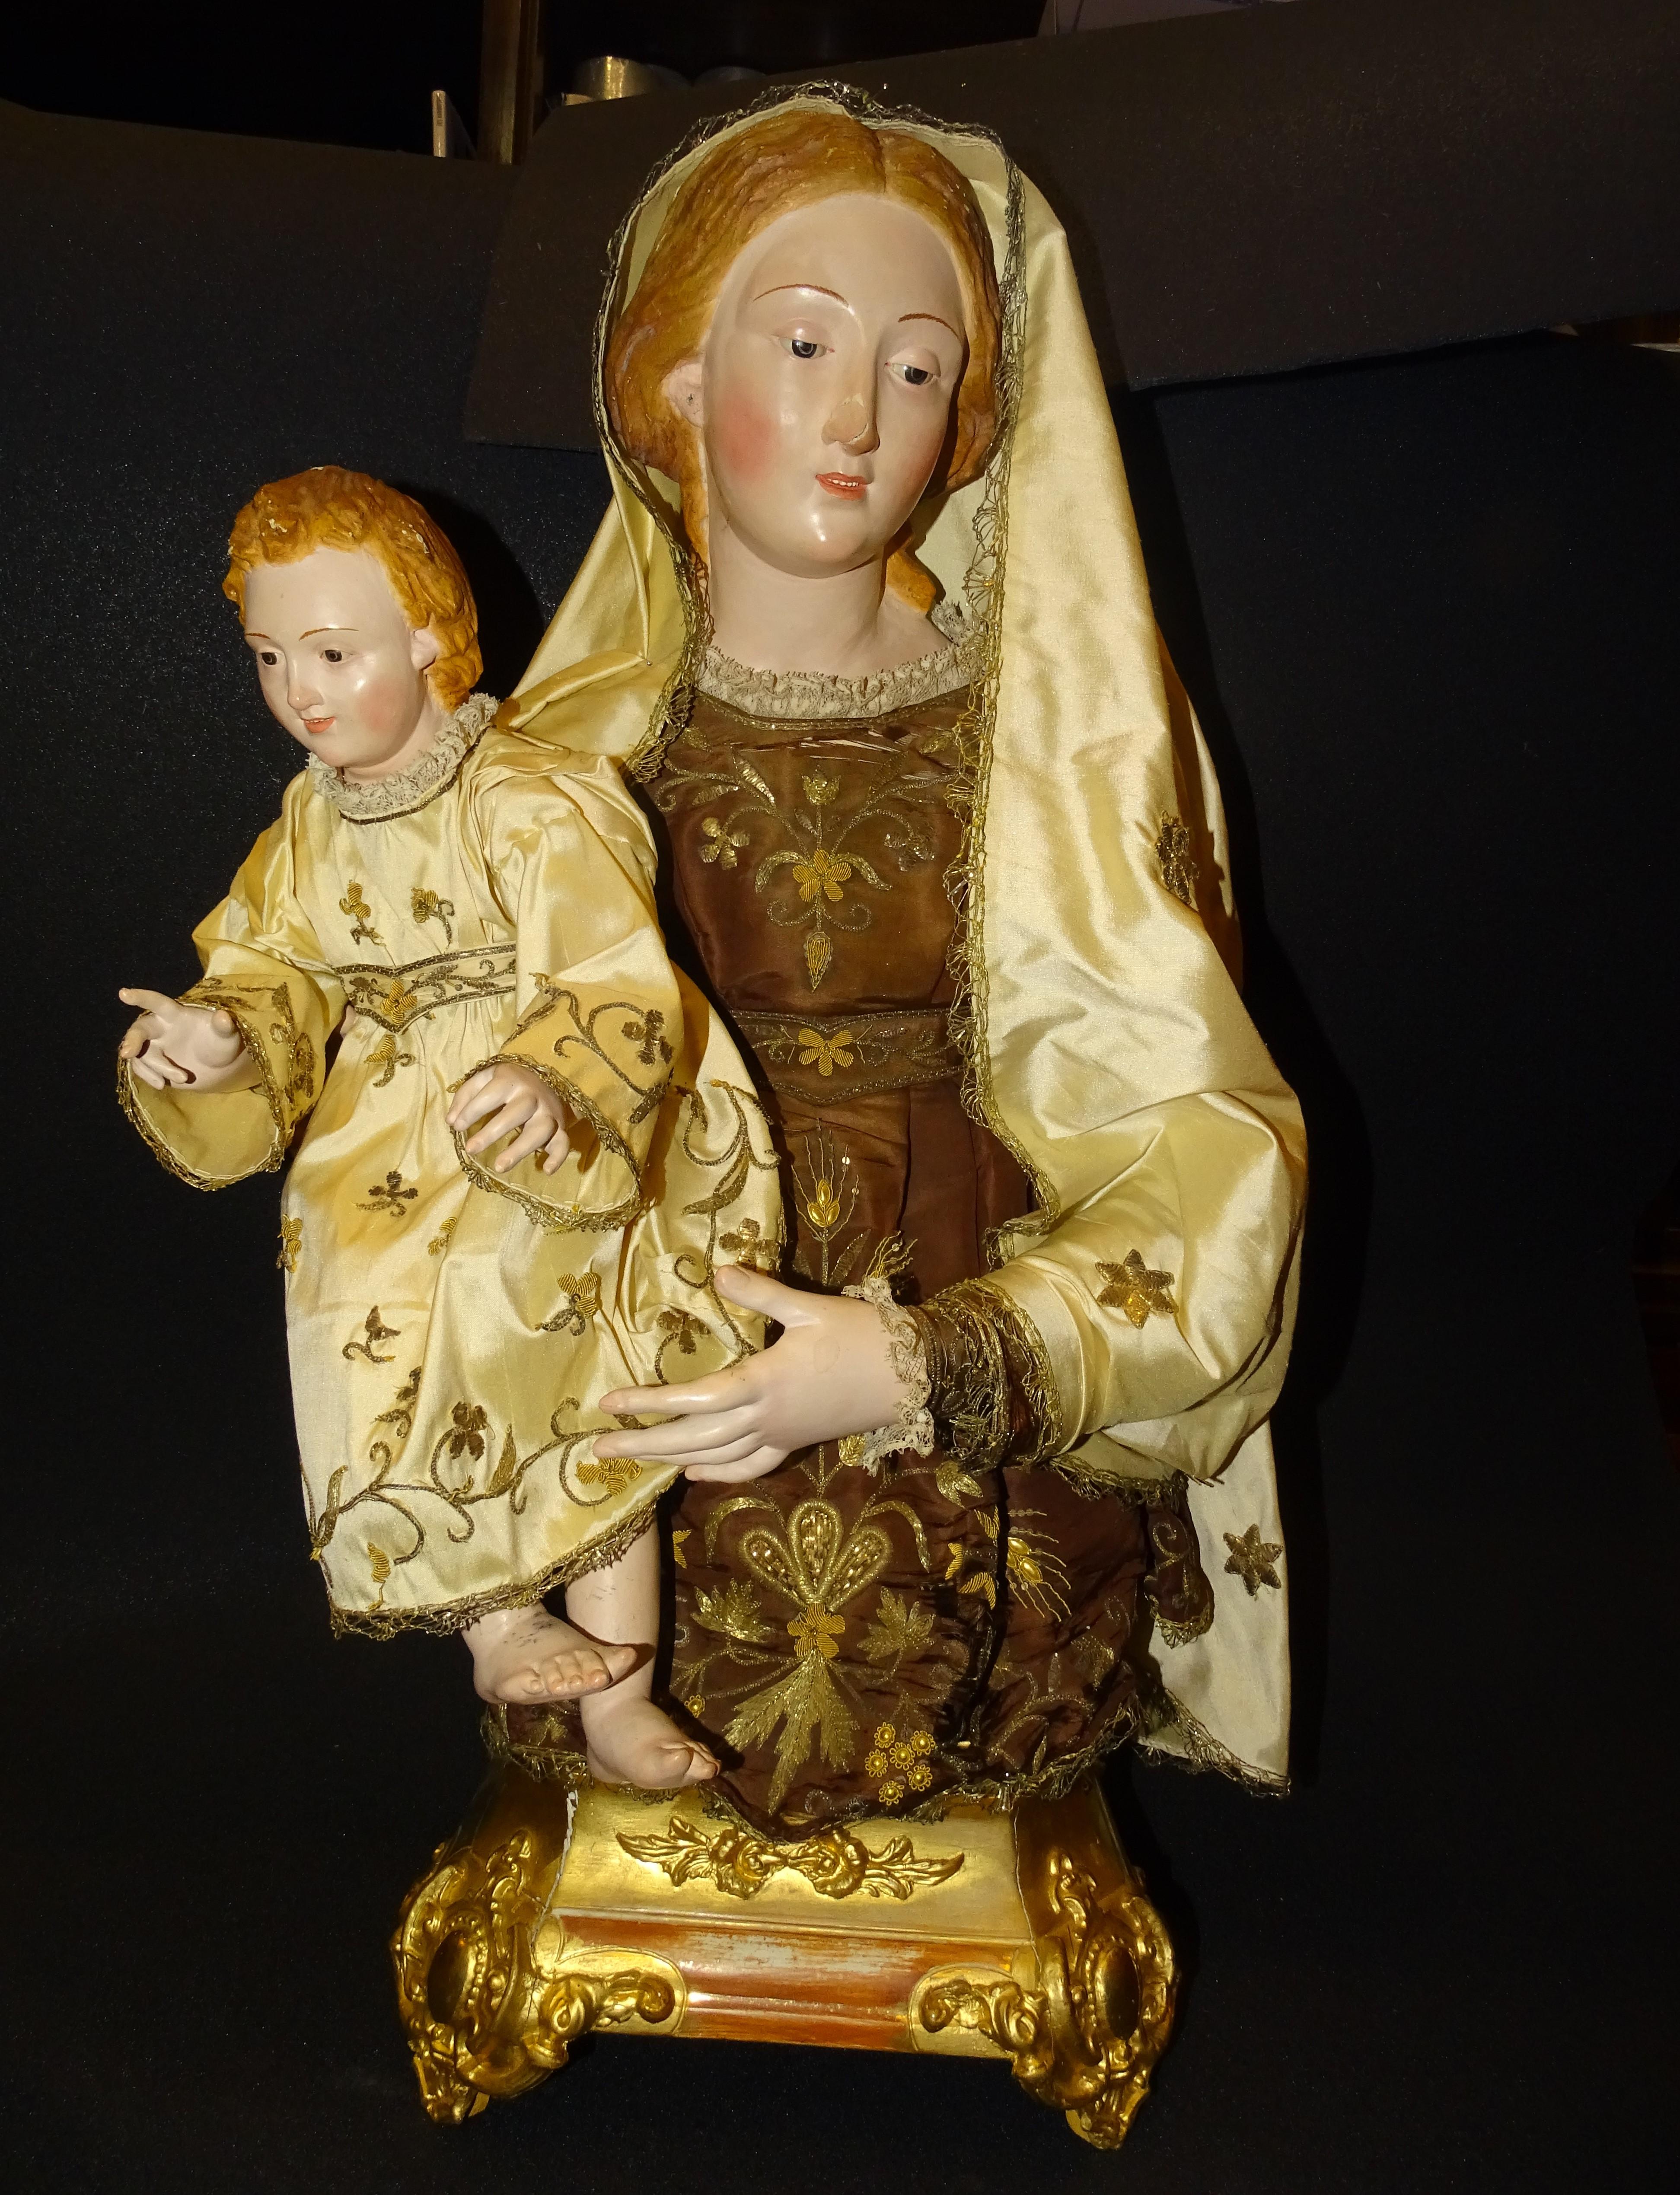 Dress size or Cap i pota, Madonna - Madonna with child, 18th century Italy
Outstanding sculptural piece formed by the Virgin Mary holding the baby Jesus on her lap. This is the Italian-type representation of the Madonna. The piece comes from